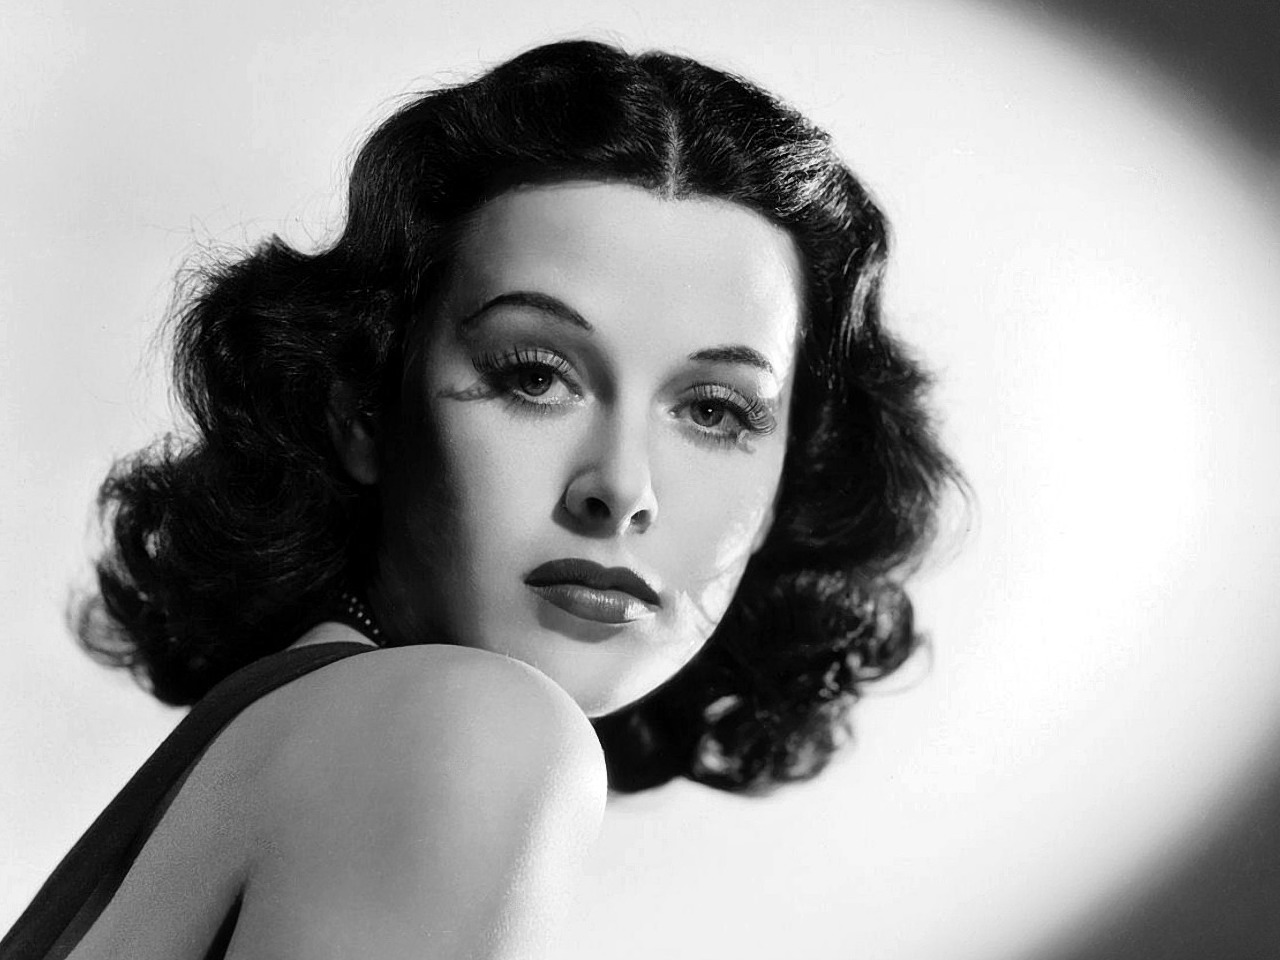 Hedy Lamarr, a 1930's actress who became famous because of the 

controversial movie Ecstasy in which she played naked, was an 

inventor. She developed a radio-guided torpedo system, and the 

‘spread-spectrum’ technology it fostered would one day be used in 

mobile phones and wi-fi connections.